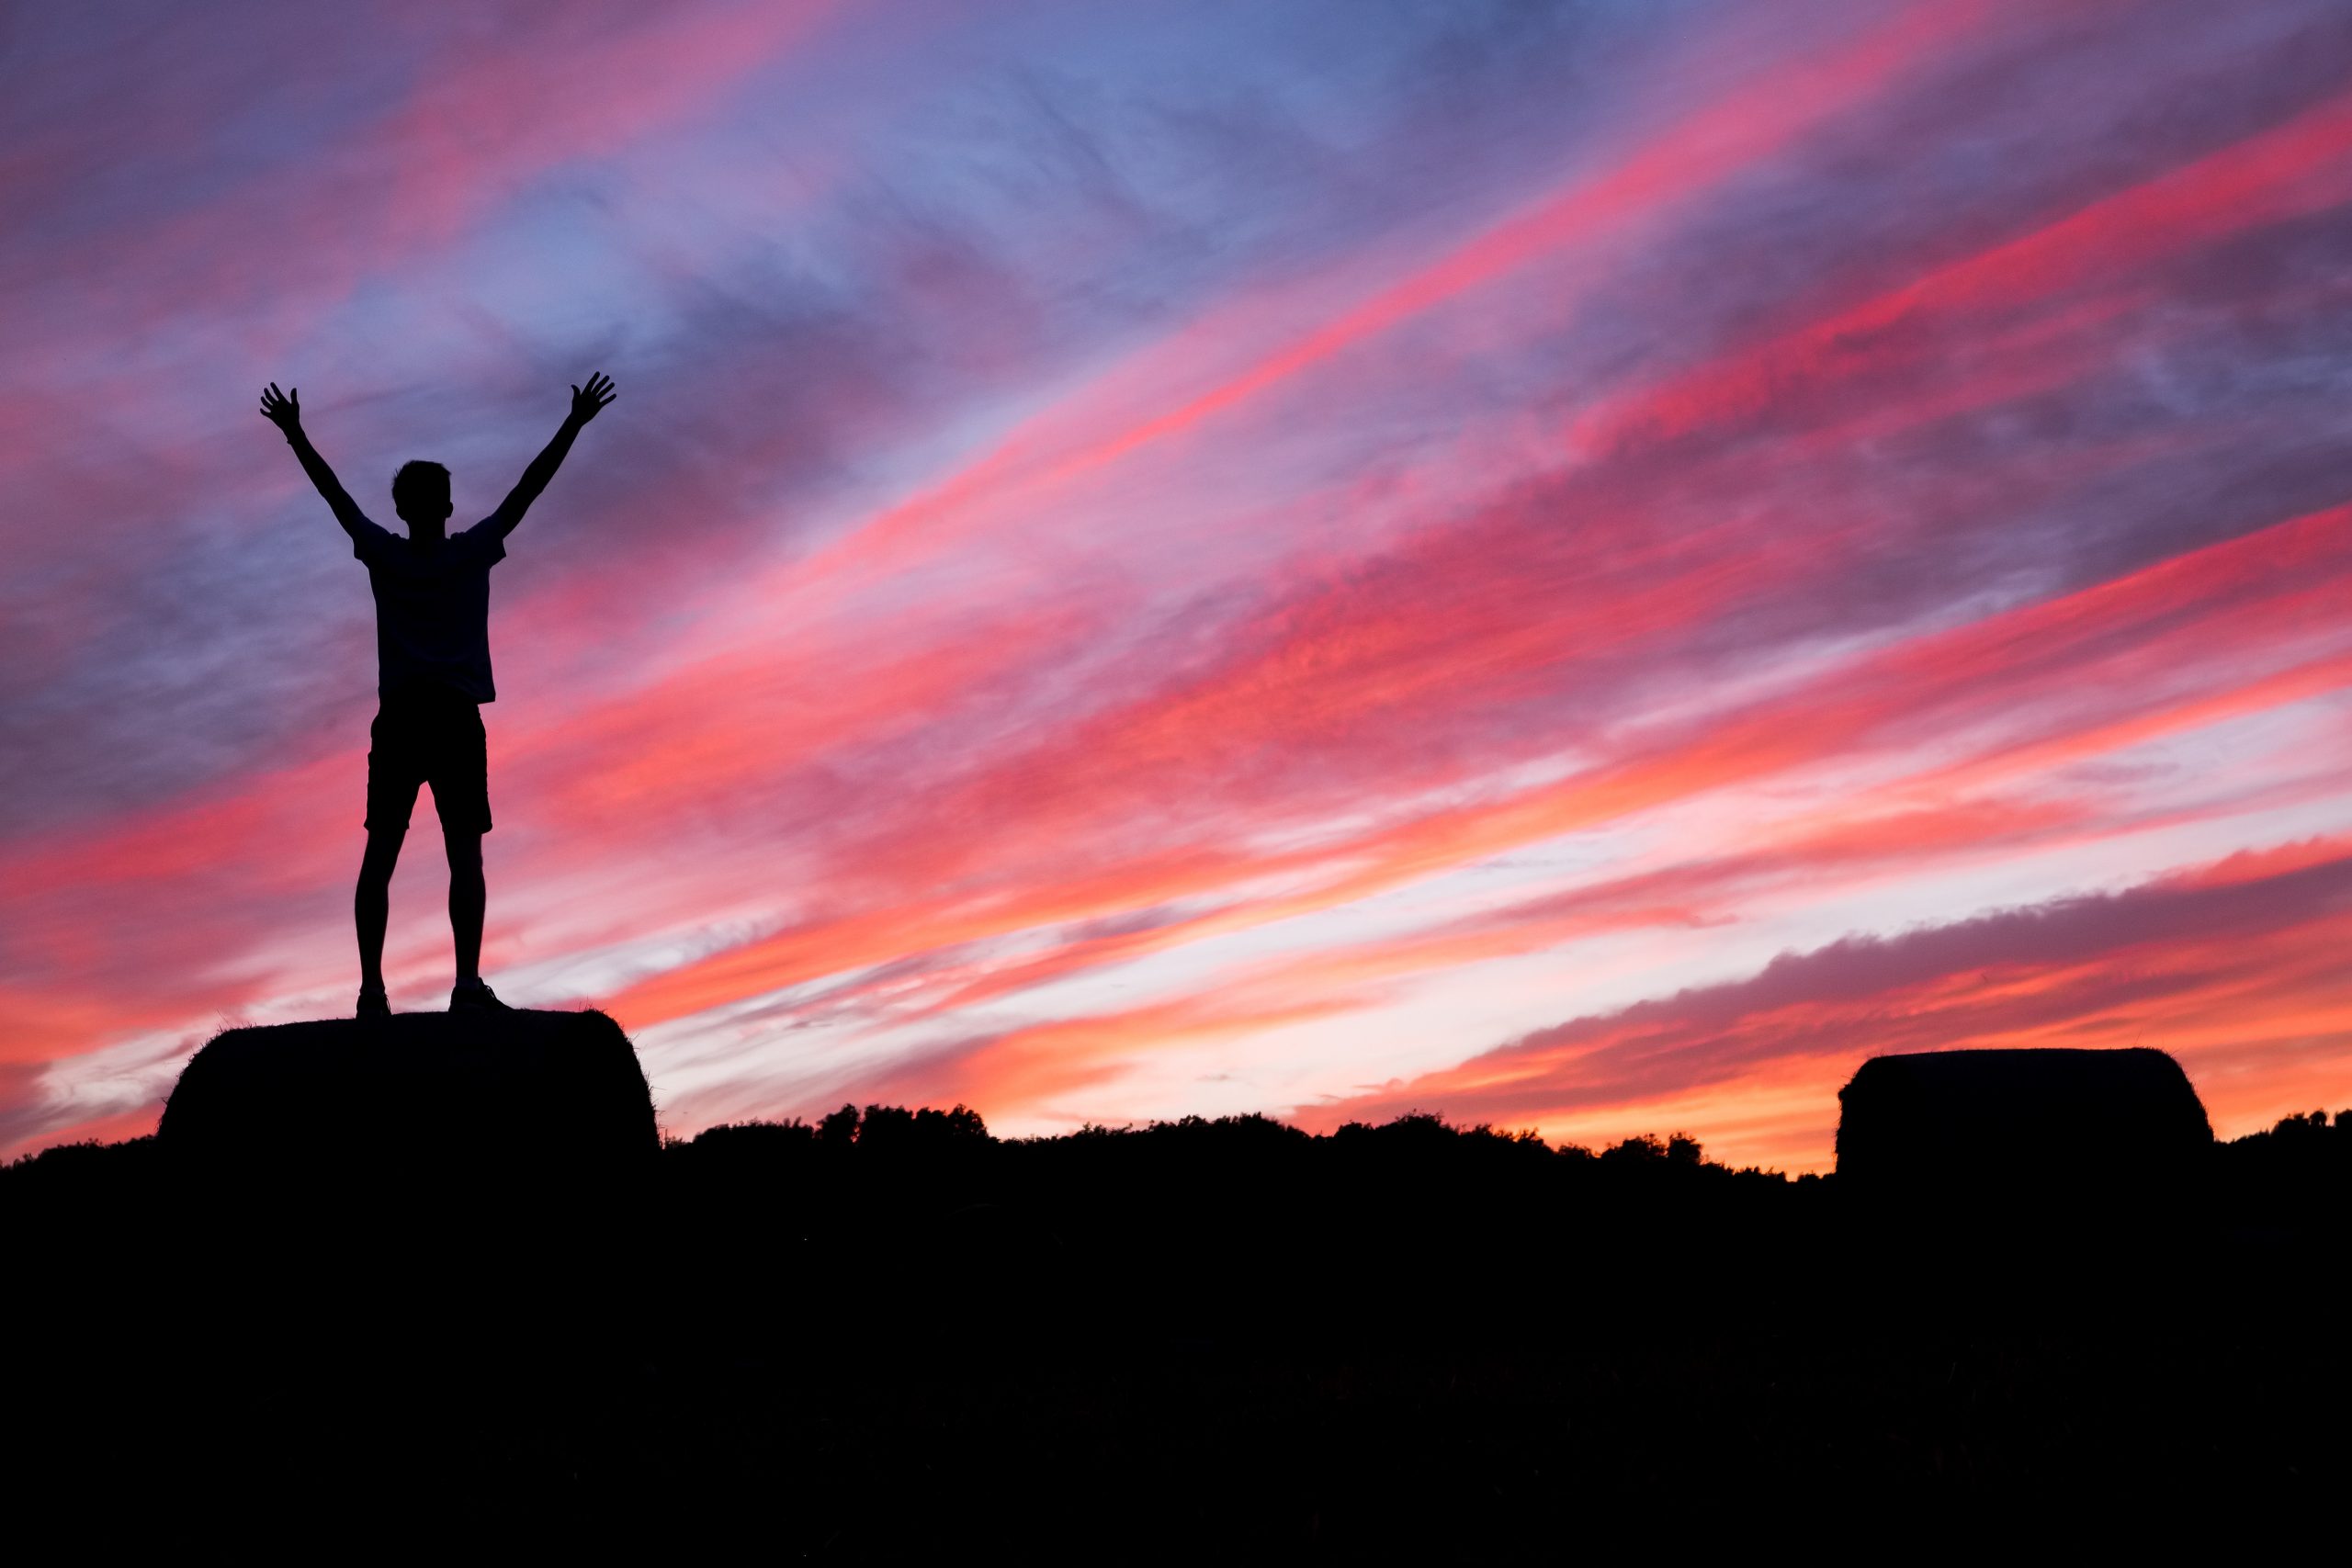 Silhouette of a person with raised arms against a vibrant sunset sky, symbolizing success.